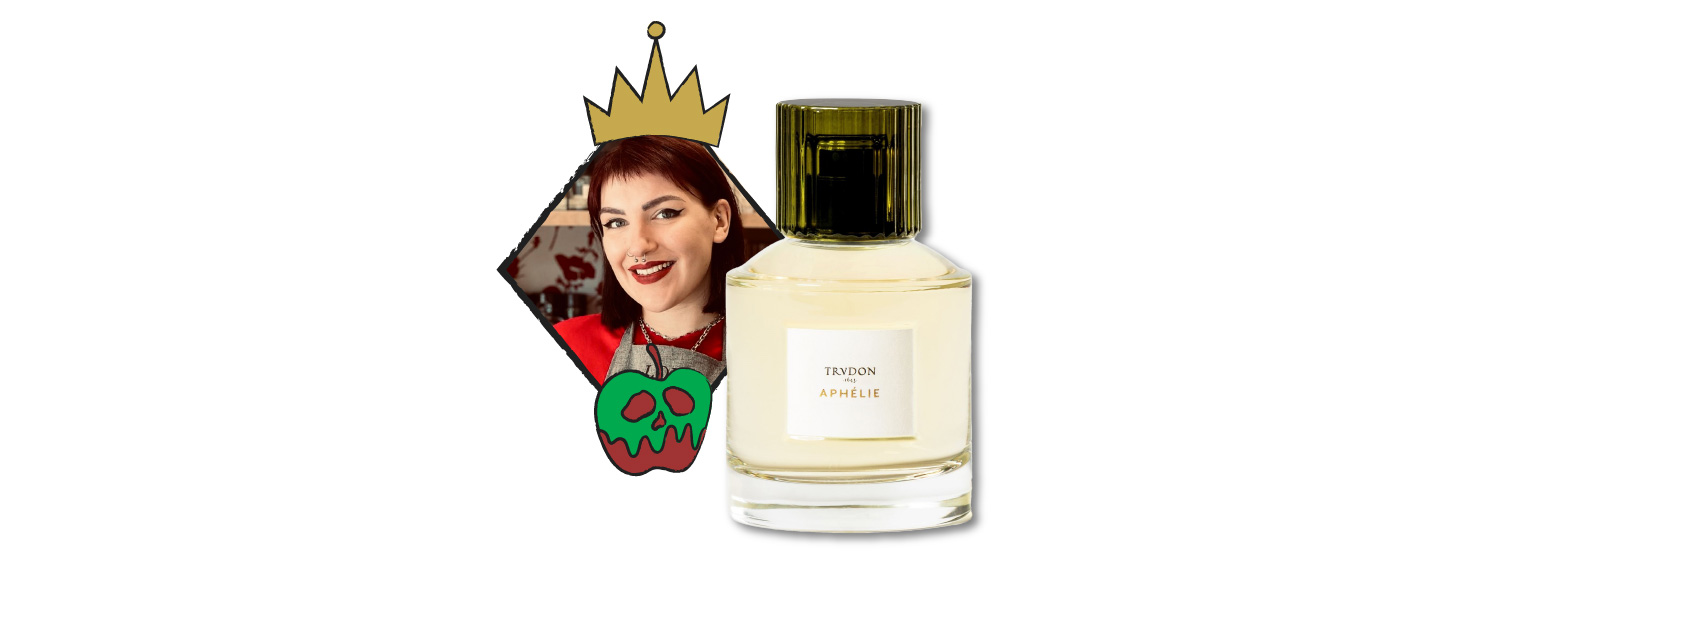 bottle of aphelie by trudon del as the evil queen from snow white